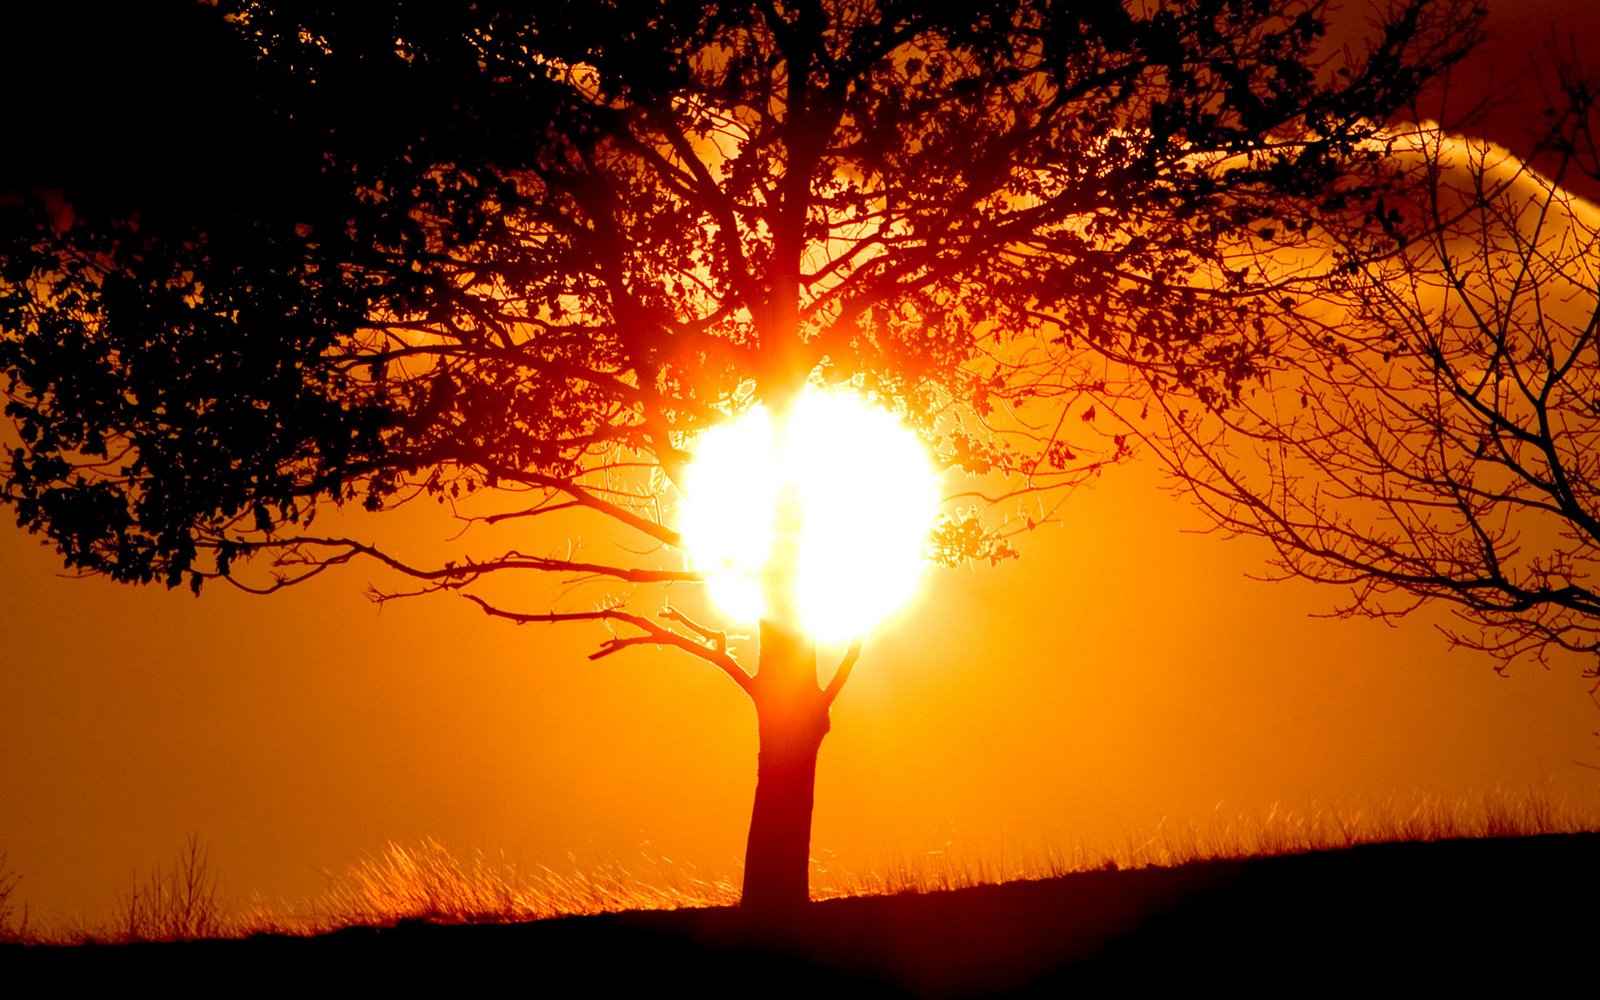 sunset_with_tree_wallpapers_nautre_photos_evening_morningsun_pictures(www